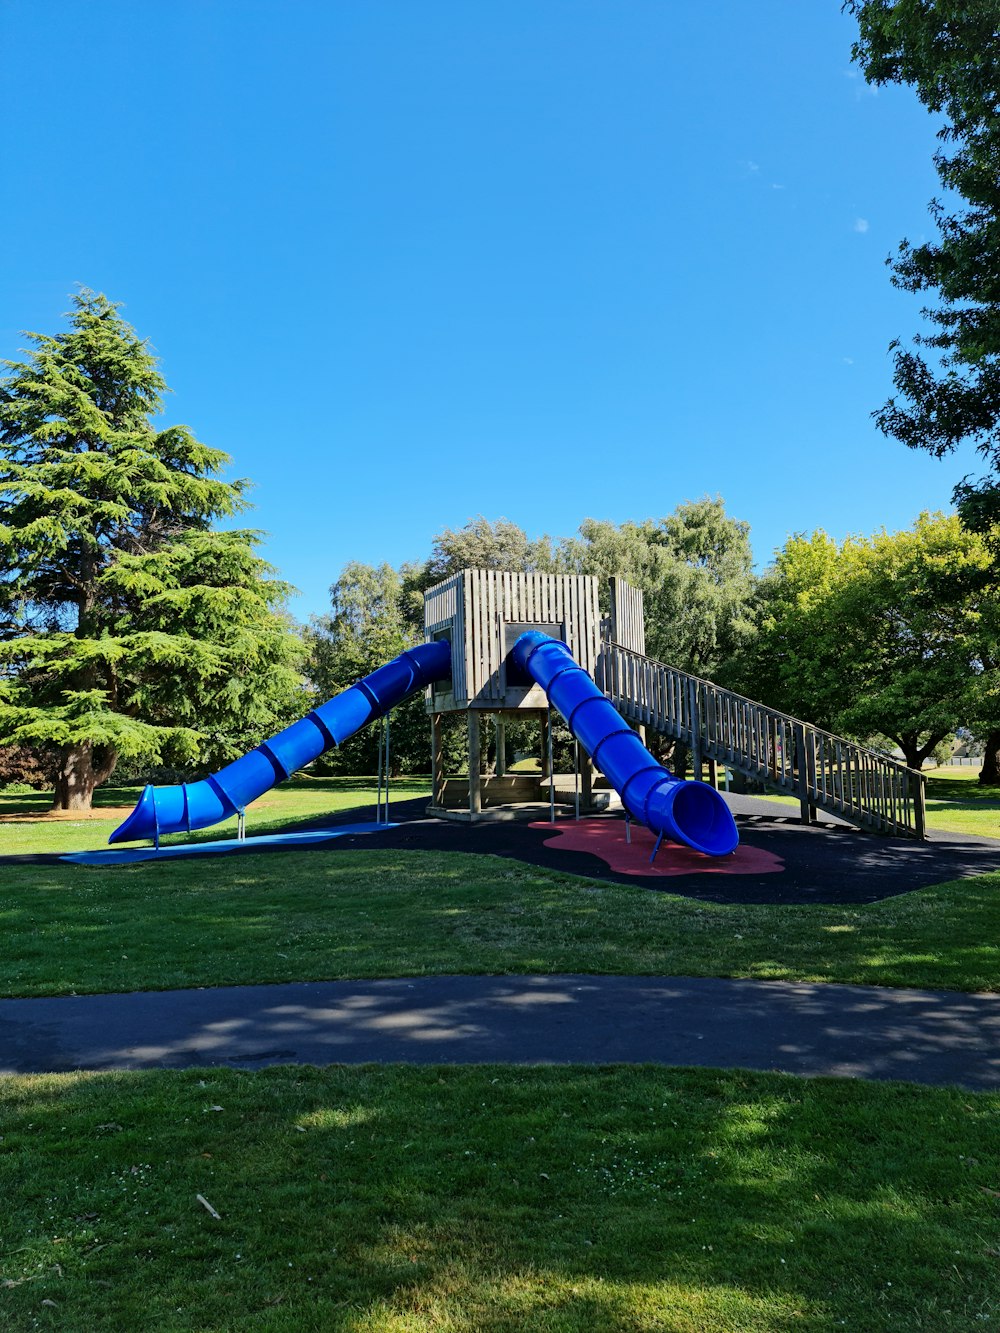 a blue slide in a park with trees in the background